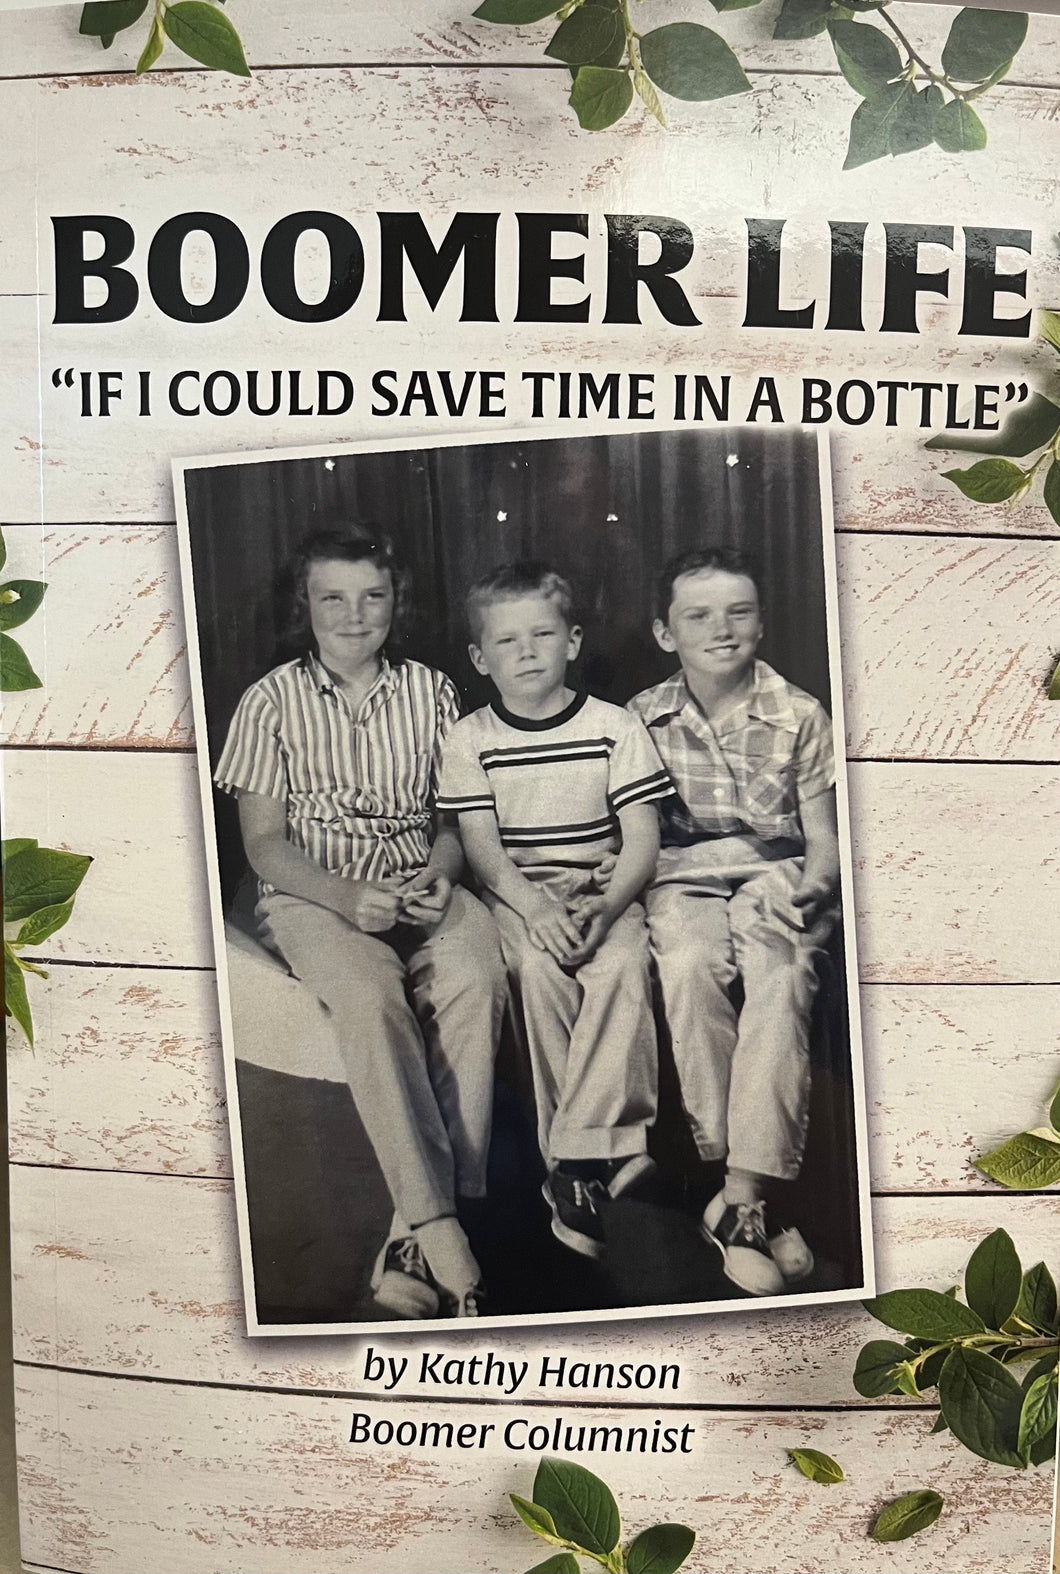 Boomer Life: If I Could Save Time in a Bottle by Kathy Hanson